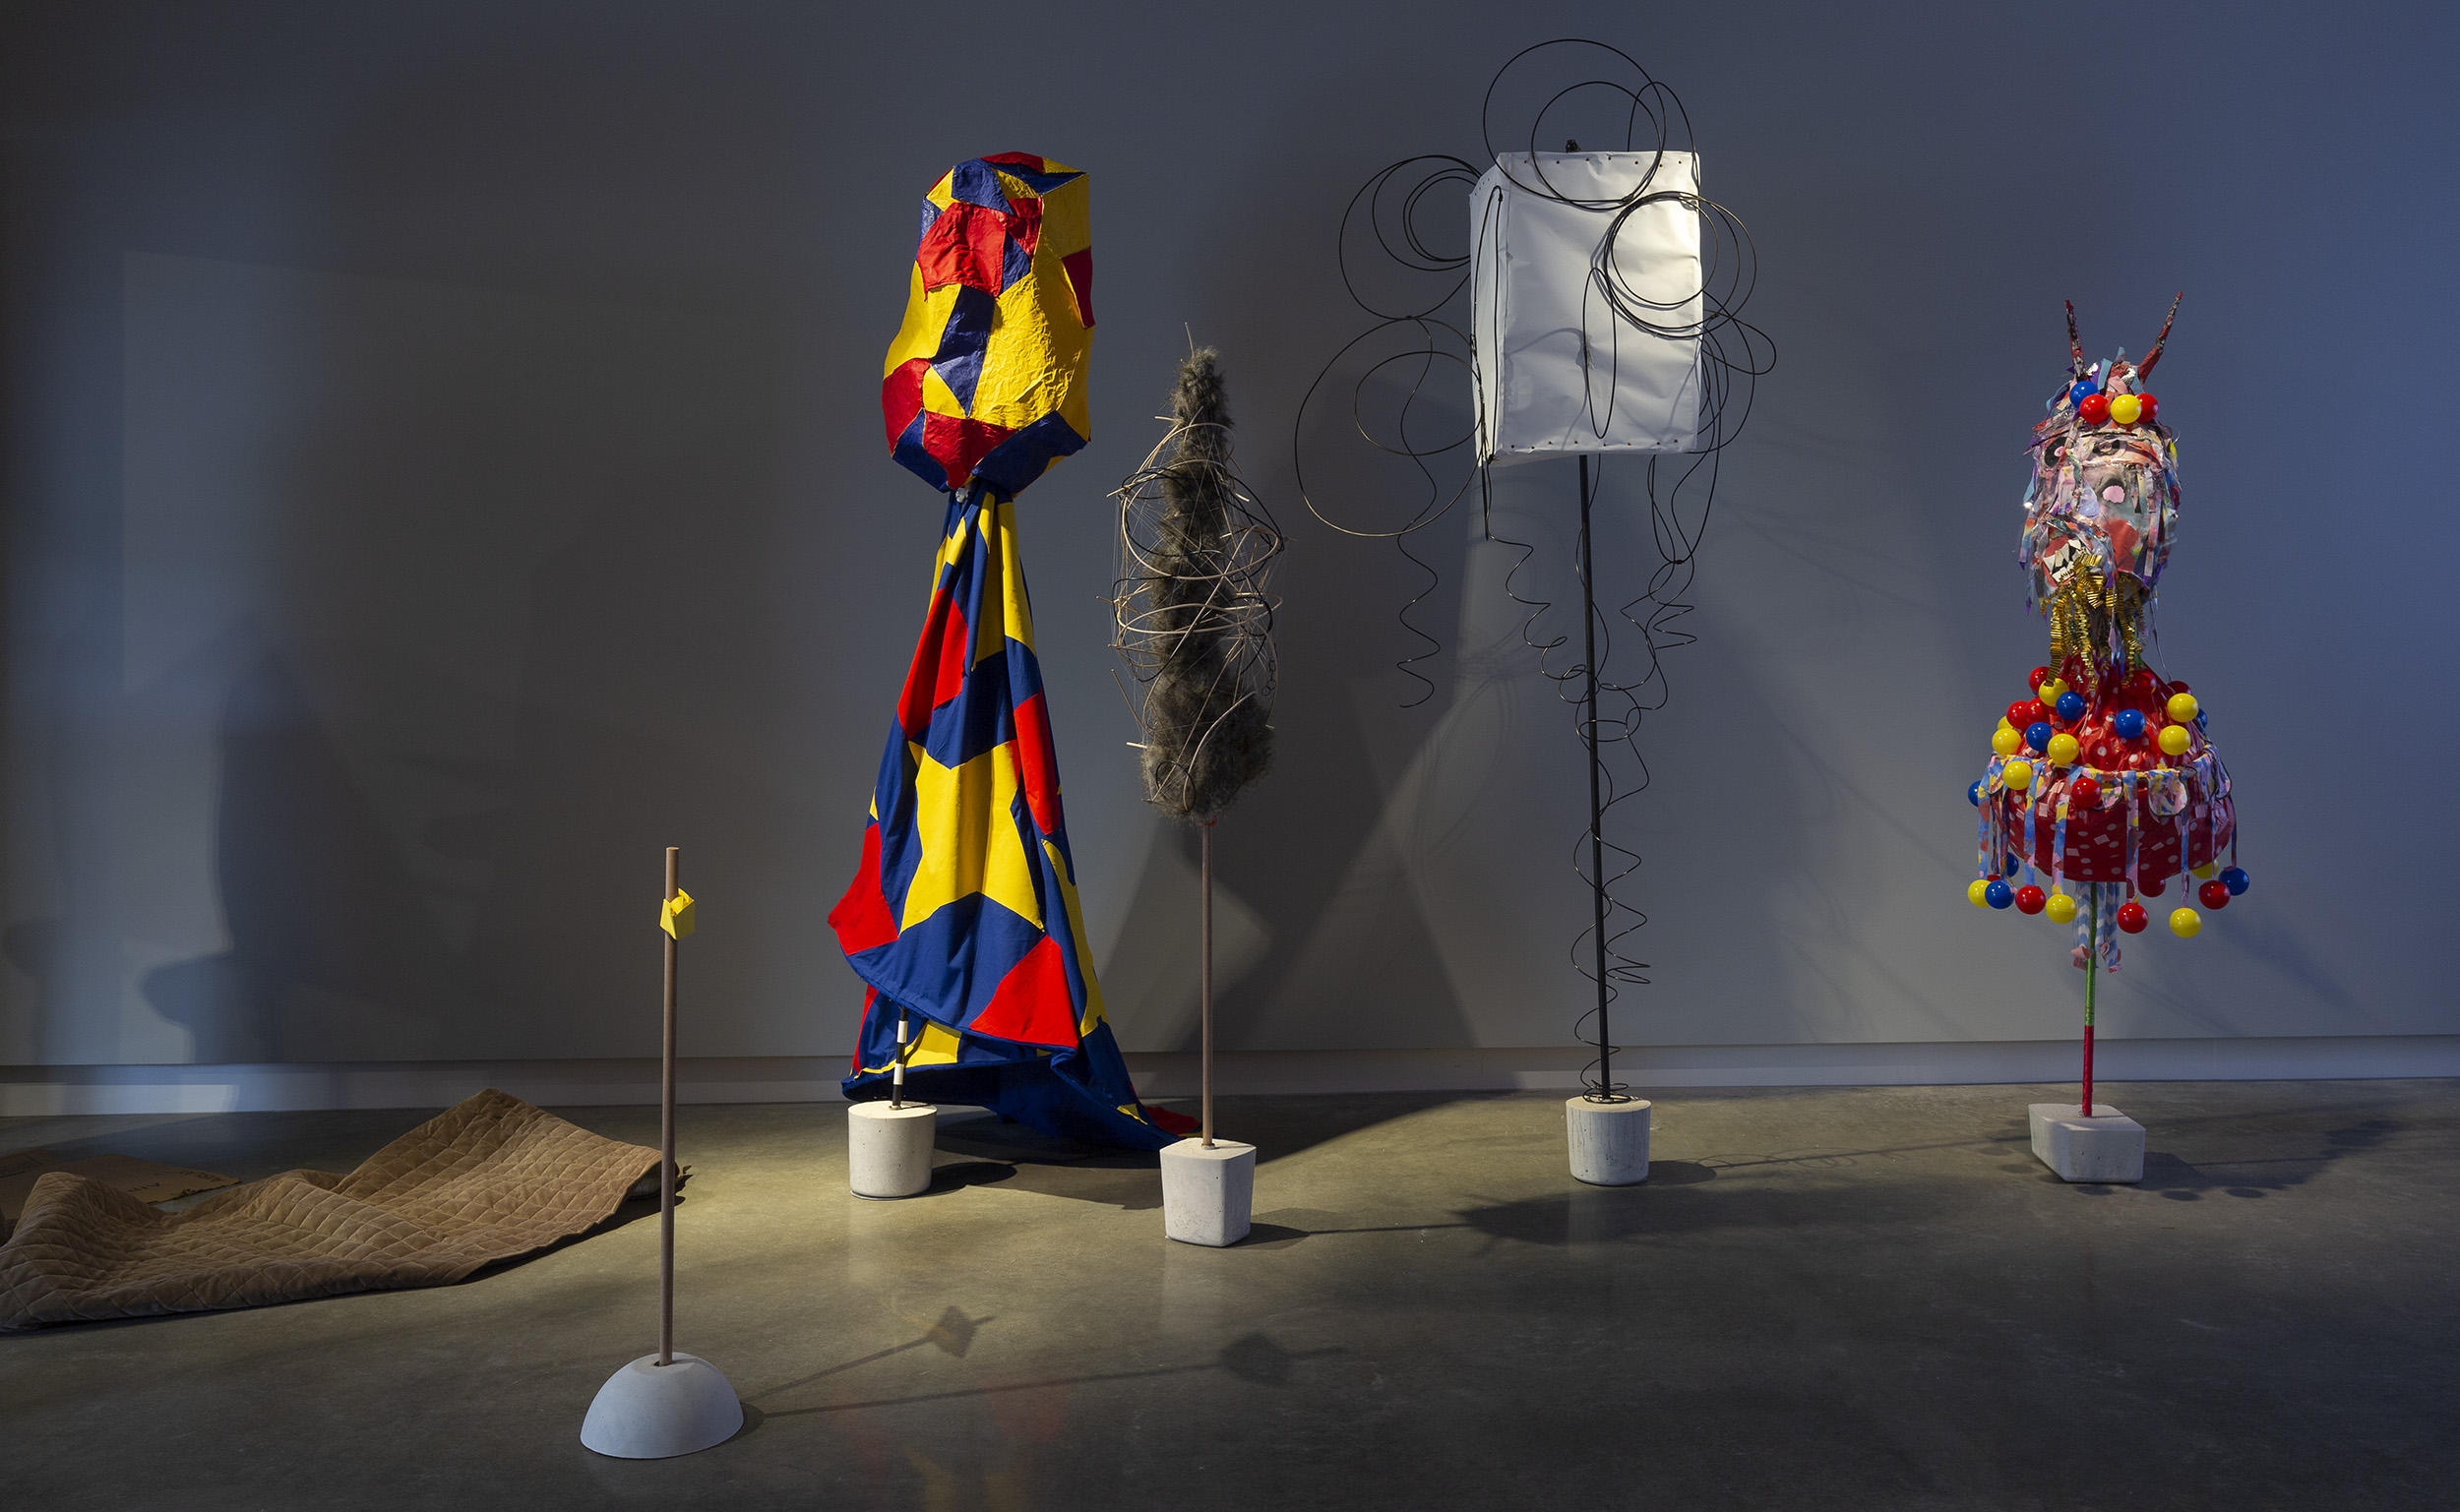 Mikala Dwyer and Justene Williams, Mondspiel (Moon Play), 2019, works by students from VCA, QCA & RMIT | Bauhaus Now!, curated by Ann Stephen, Buxton Contemporary, Melbourne (photo: Christian Capurro)